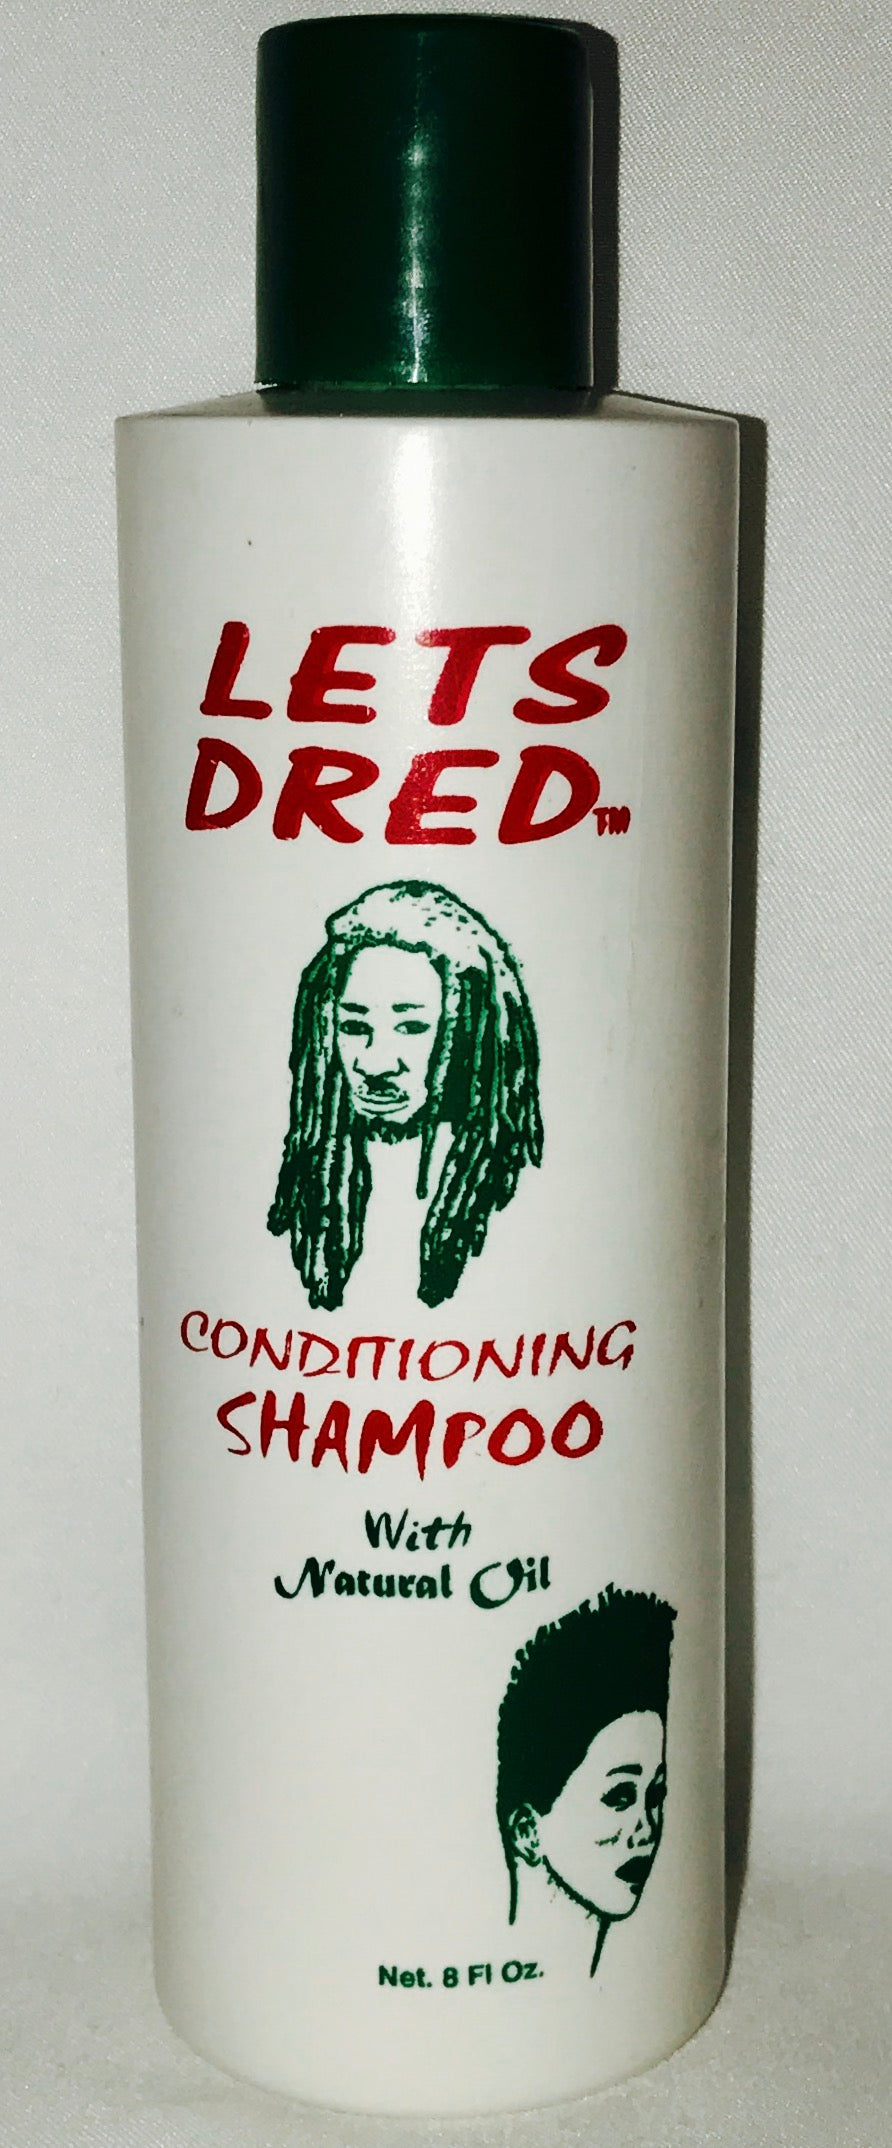 Let's Dreds Conditioning Shampoo